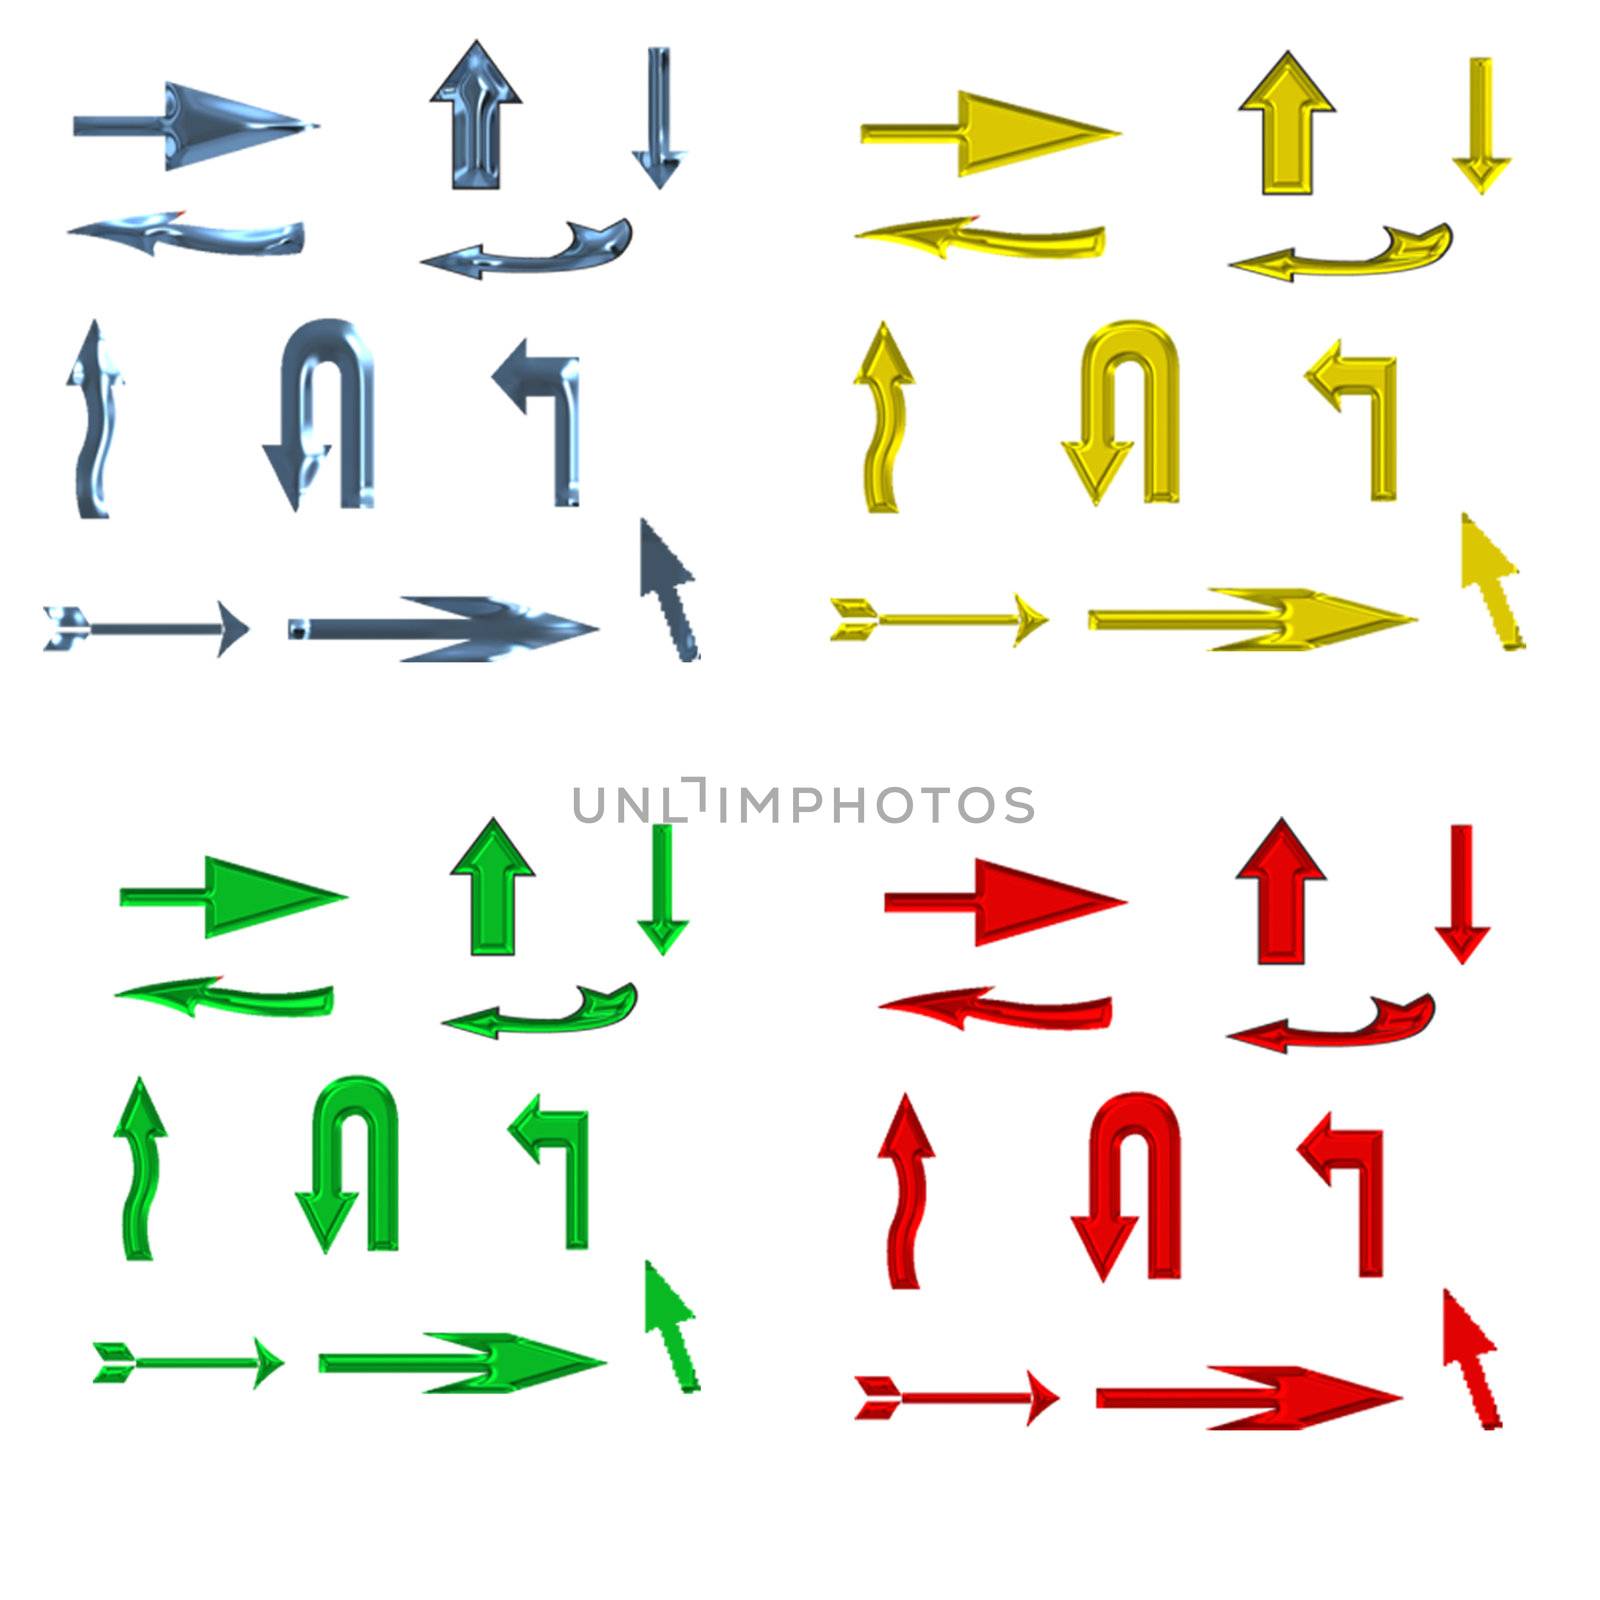 A collection of arrows